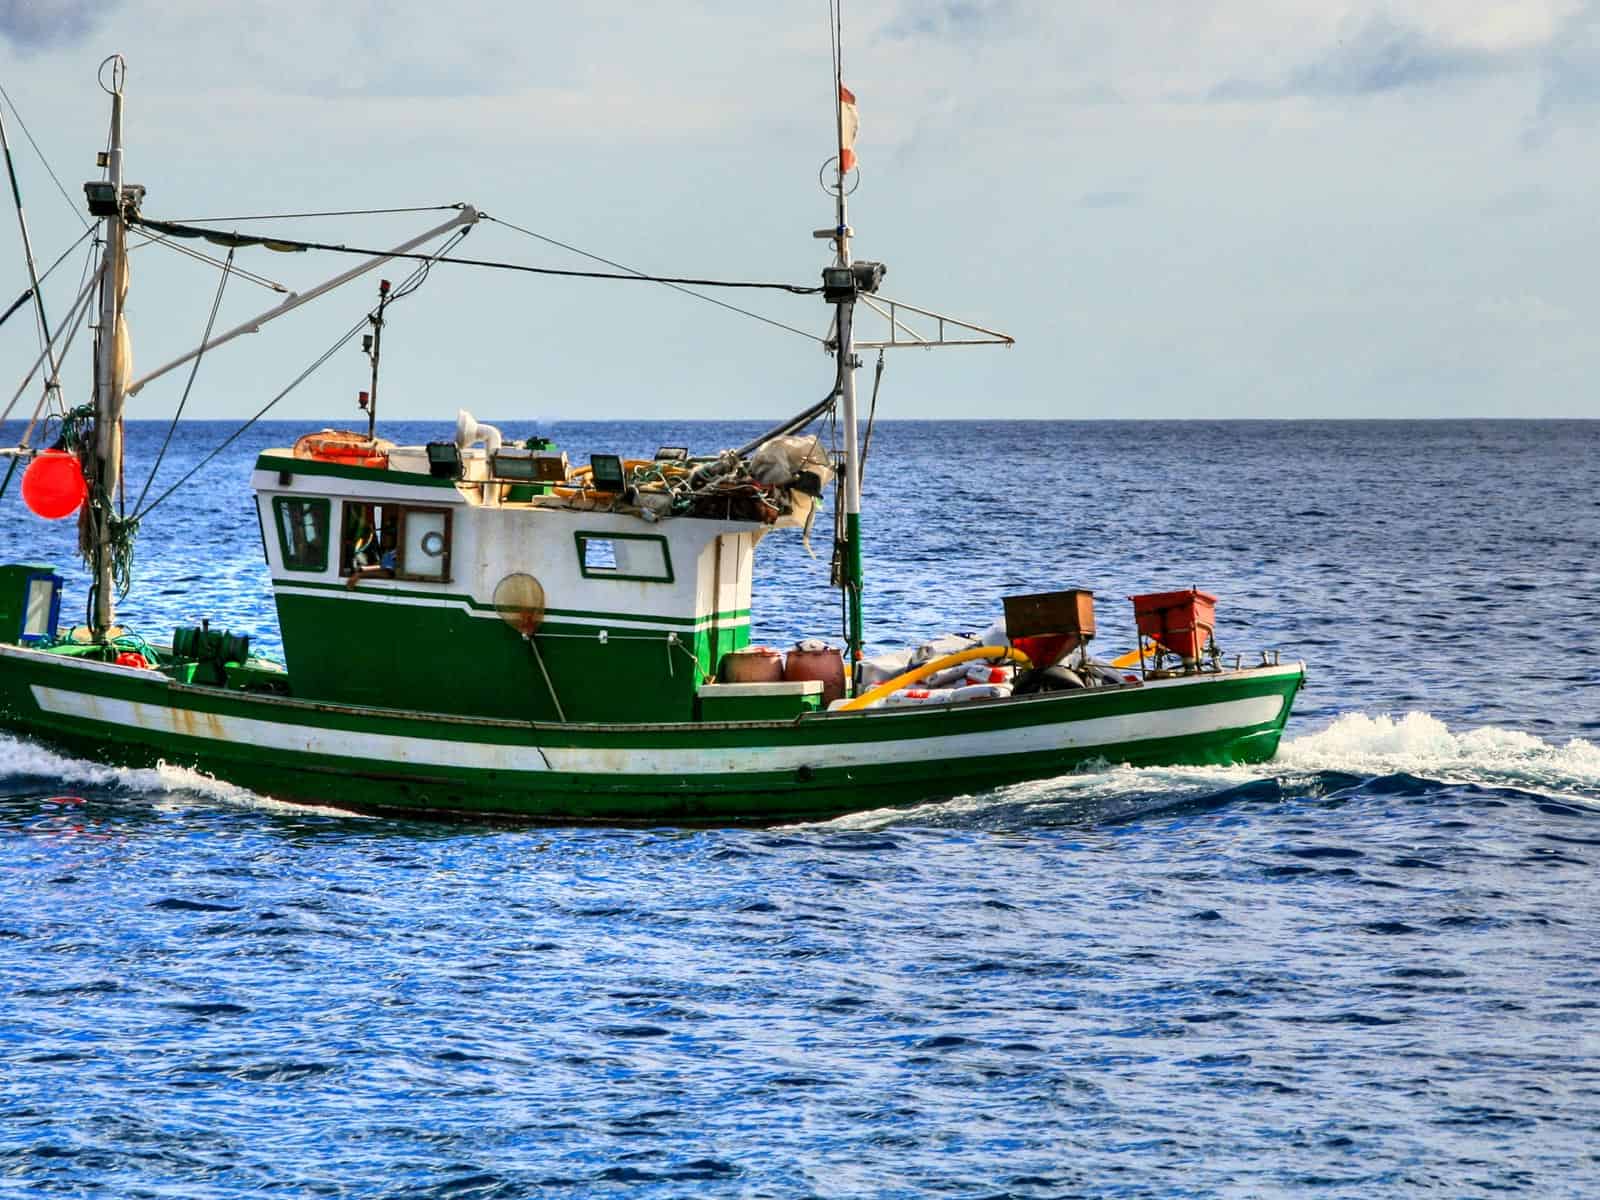 Fishing_boat_in_the_Canary_Islands-22234.jpg